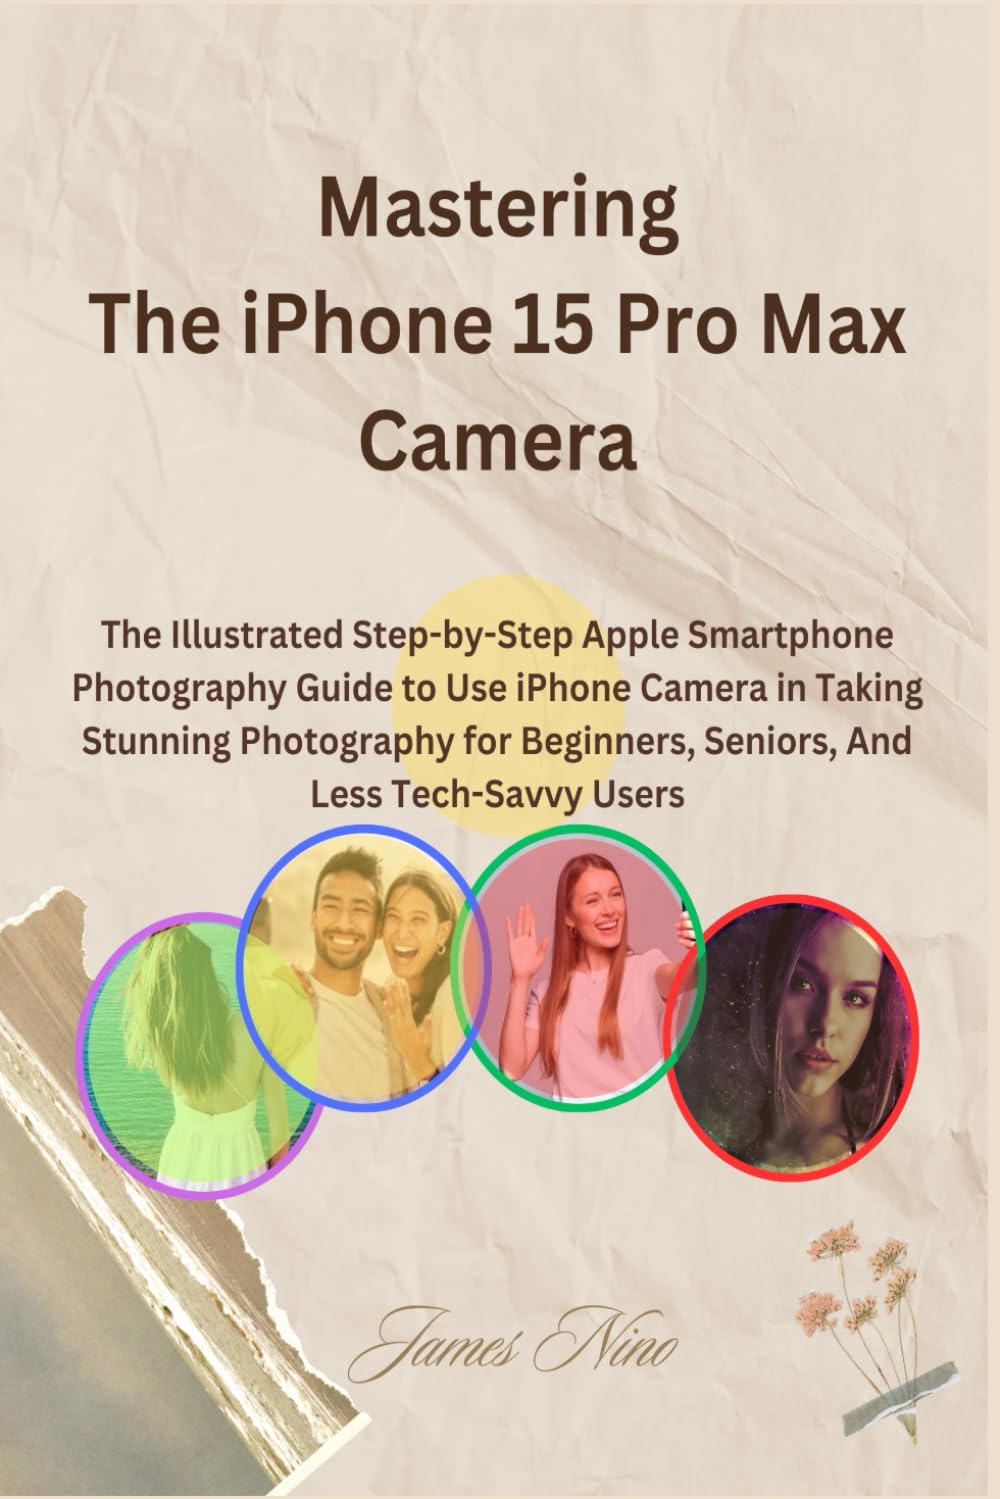 Mastering The iPhone 15 Pro Max Camera: The Illustrated Step-by-Step Apple Smartphone Photography Guide to Use iPhone Camera in Taking Stunning ... Beginners, Seniors, And Less Tech-Savvy Users